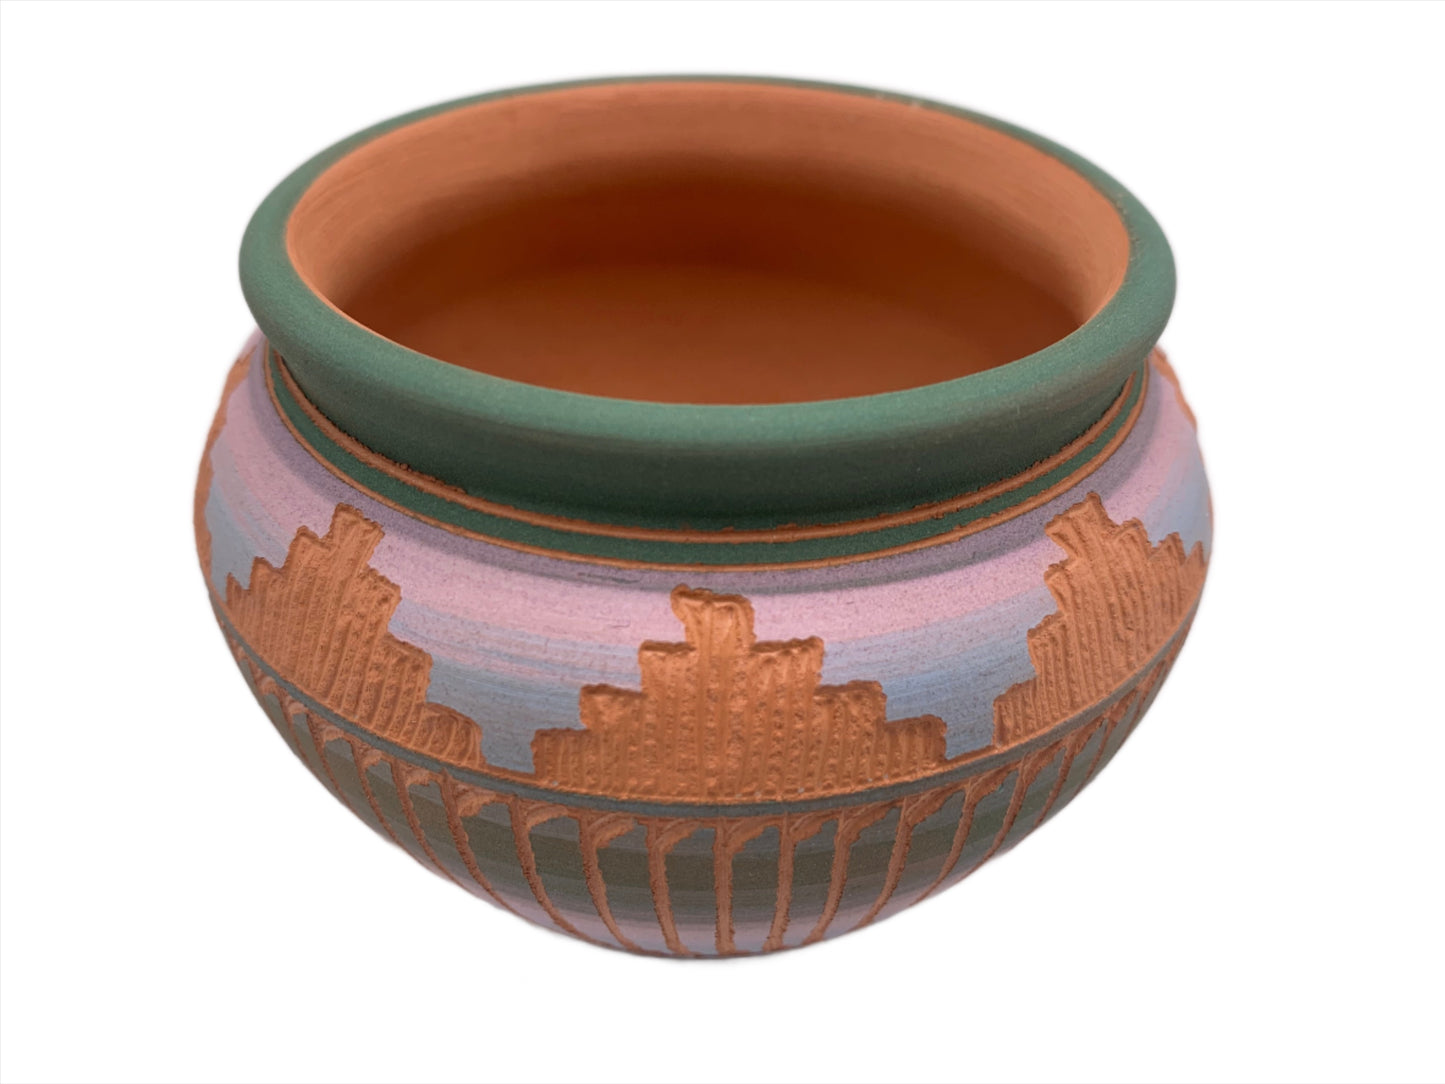 Navajo Etched Pottery by Millissa Charlie